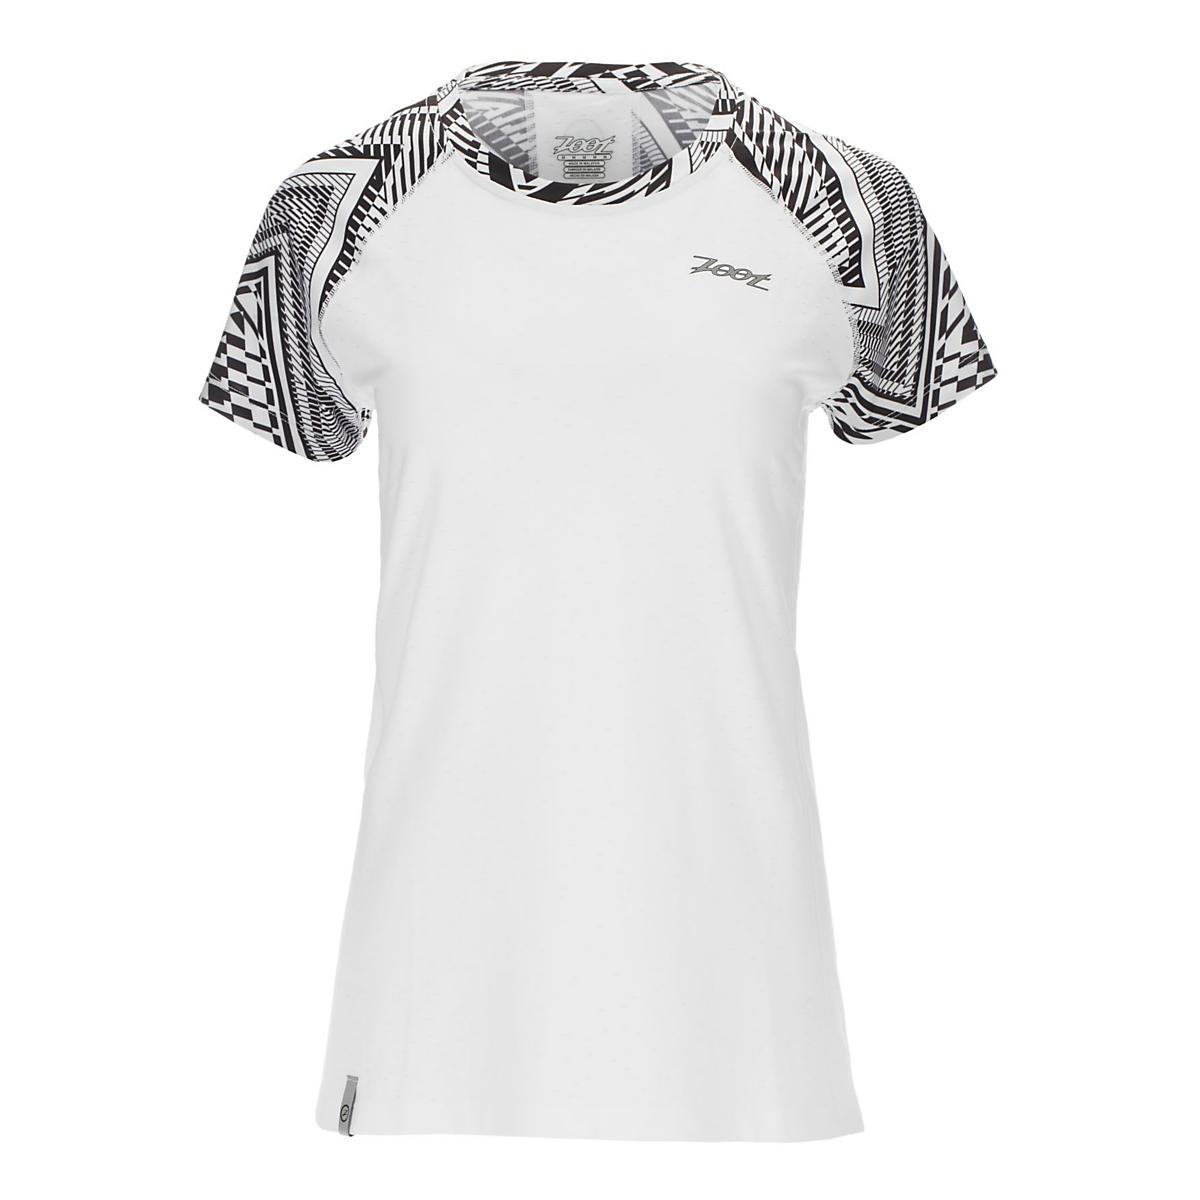 Womens R-Gear Finish First Short Sleeve Technical Tops at Road Runner ...